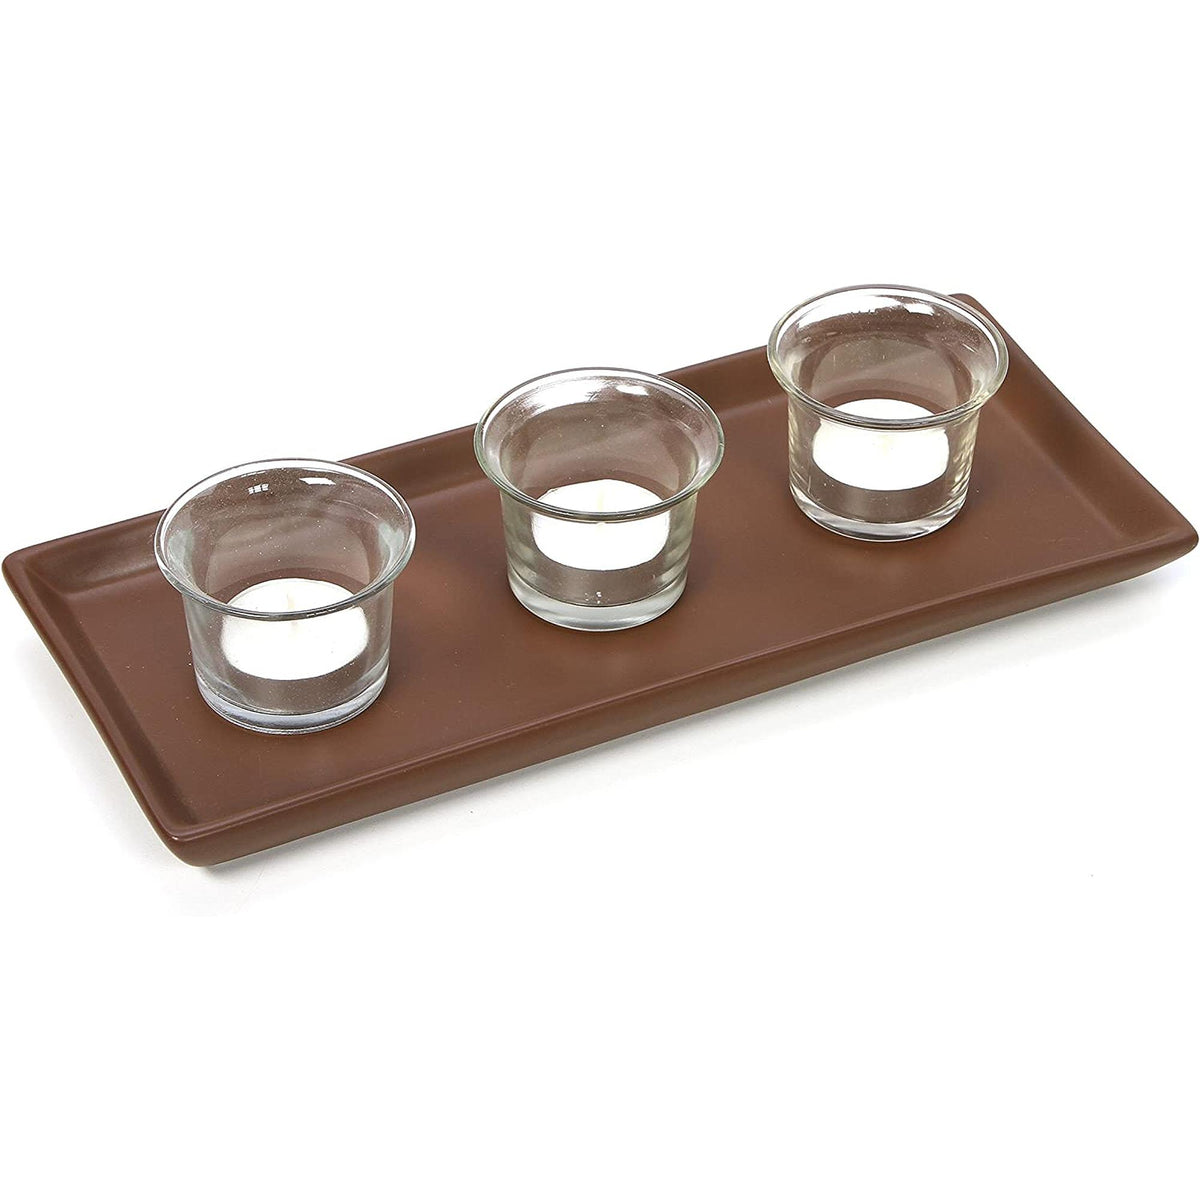 HOSLEY®  Ceramic Tray, Brown Color, 11 inches Long